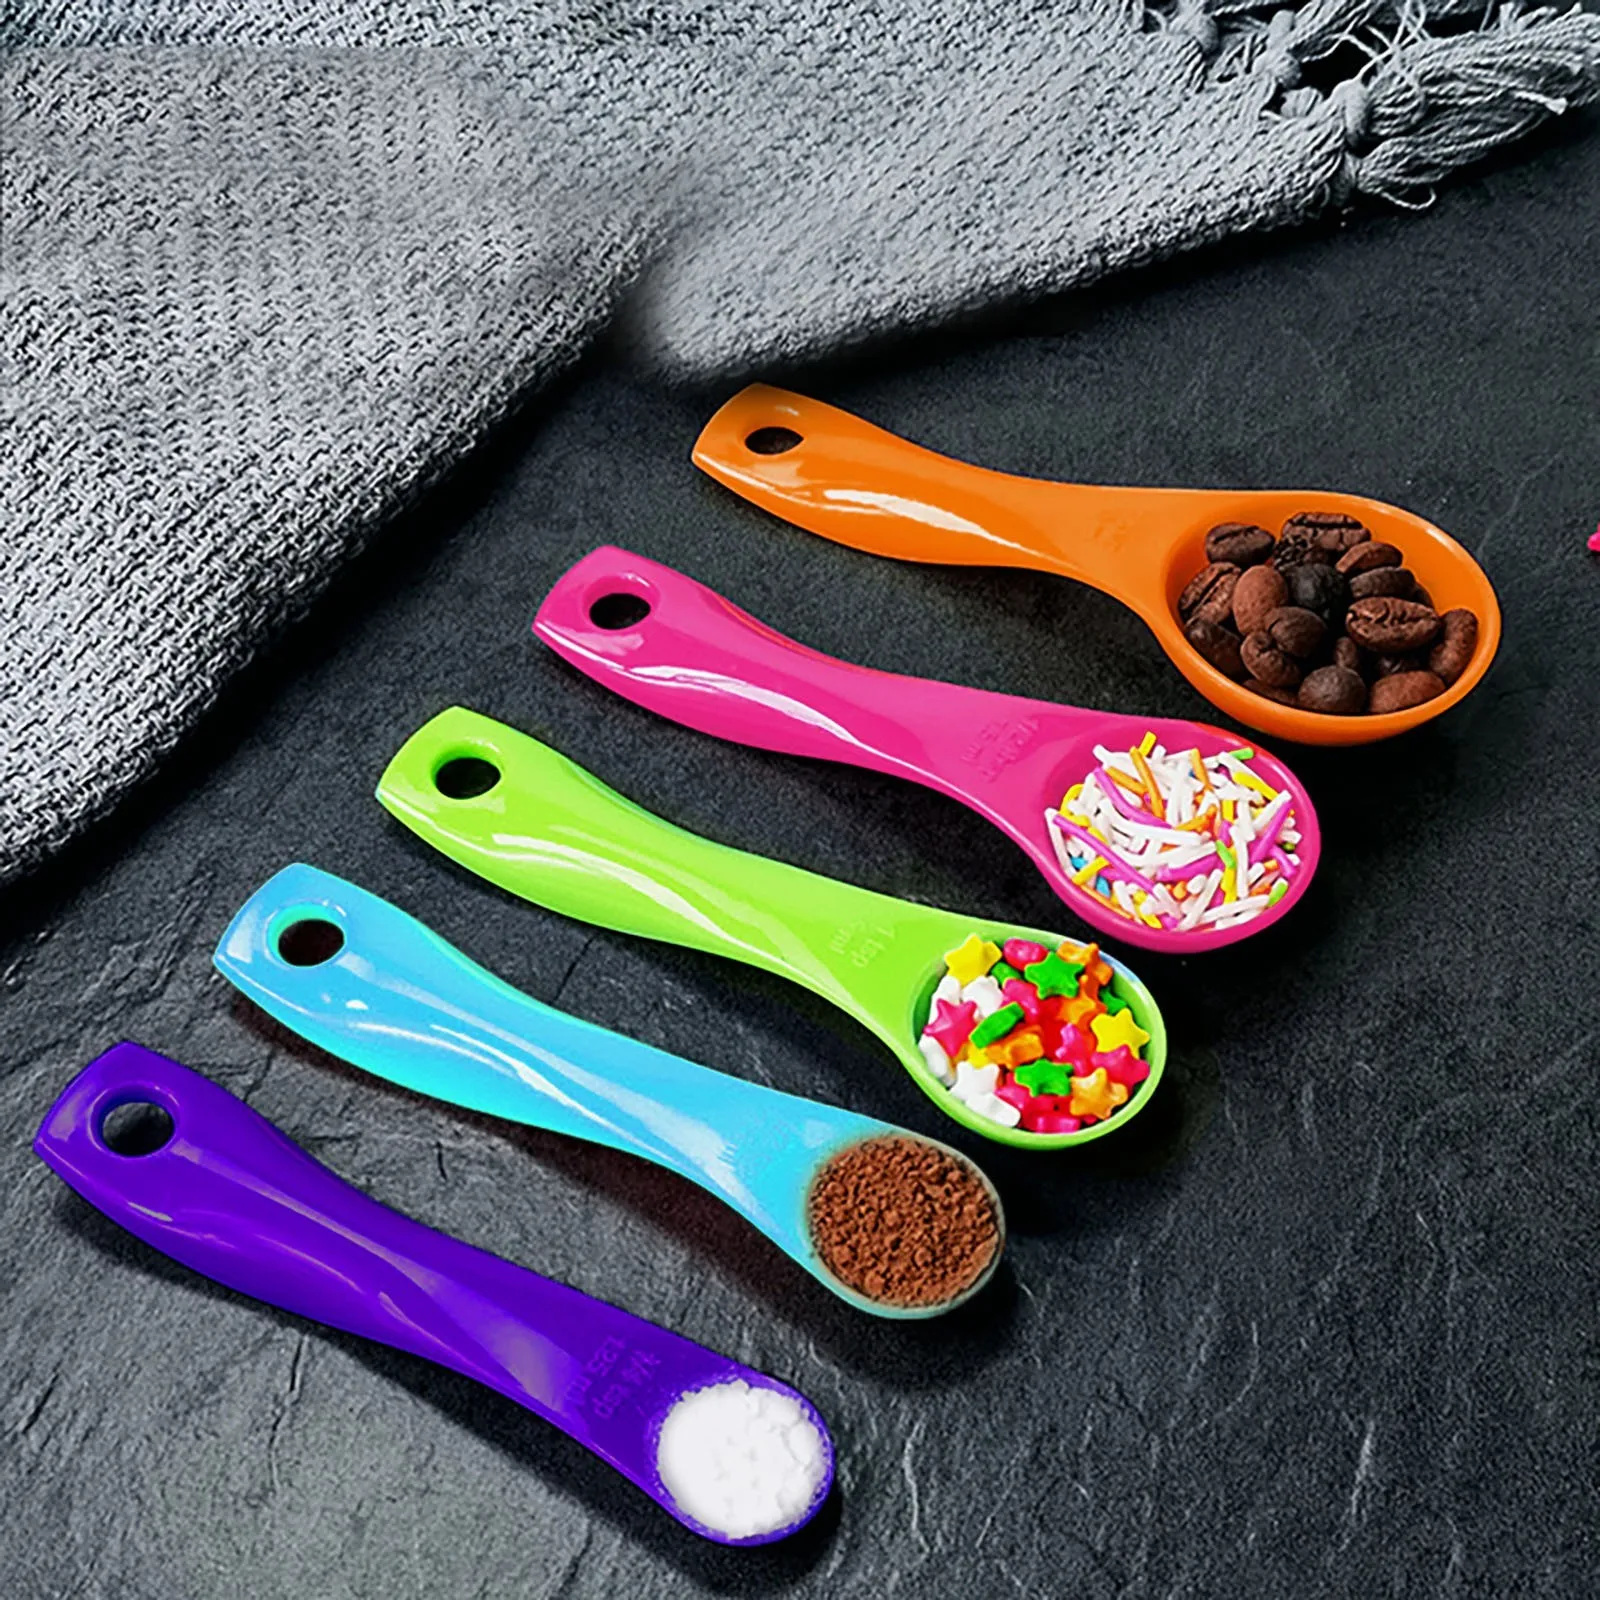 5pcs/set 1 / 2.5 5 / 7.5/ 15 ml Colorful Plastic Baking Measuring Spoon Set  - Price history & Review, AliExpress Seller - Dcrt pastry tools Store